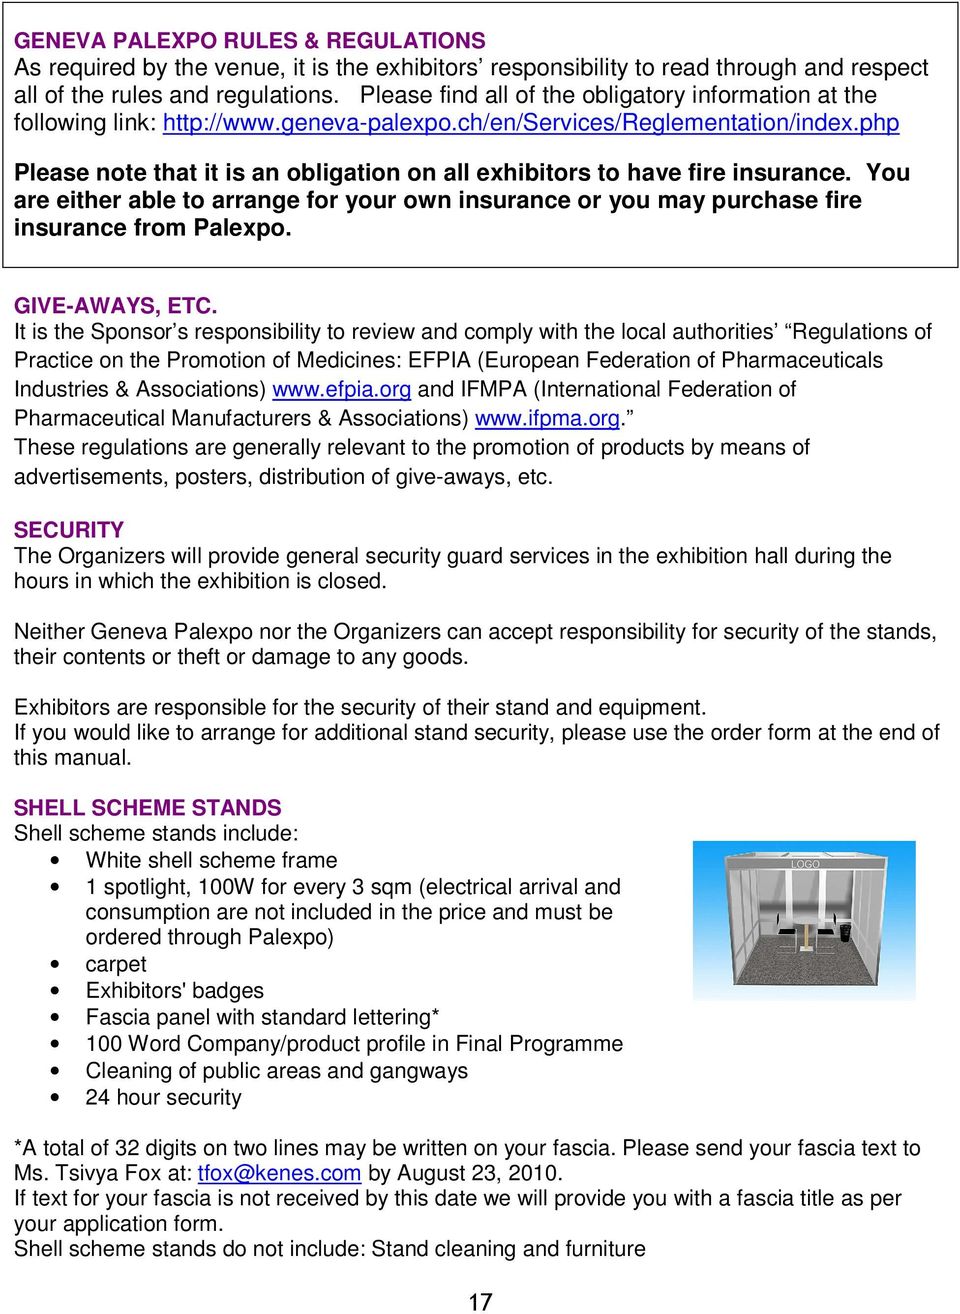 php Please note that it is an obligation on all exhibitors to have fire insurance. You are either able to arrange for your own insurance or you may purchase fire insurance from Palexpo.